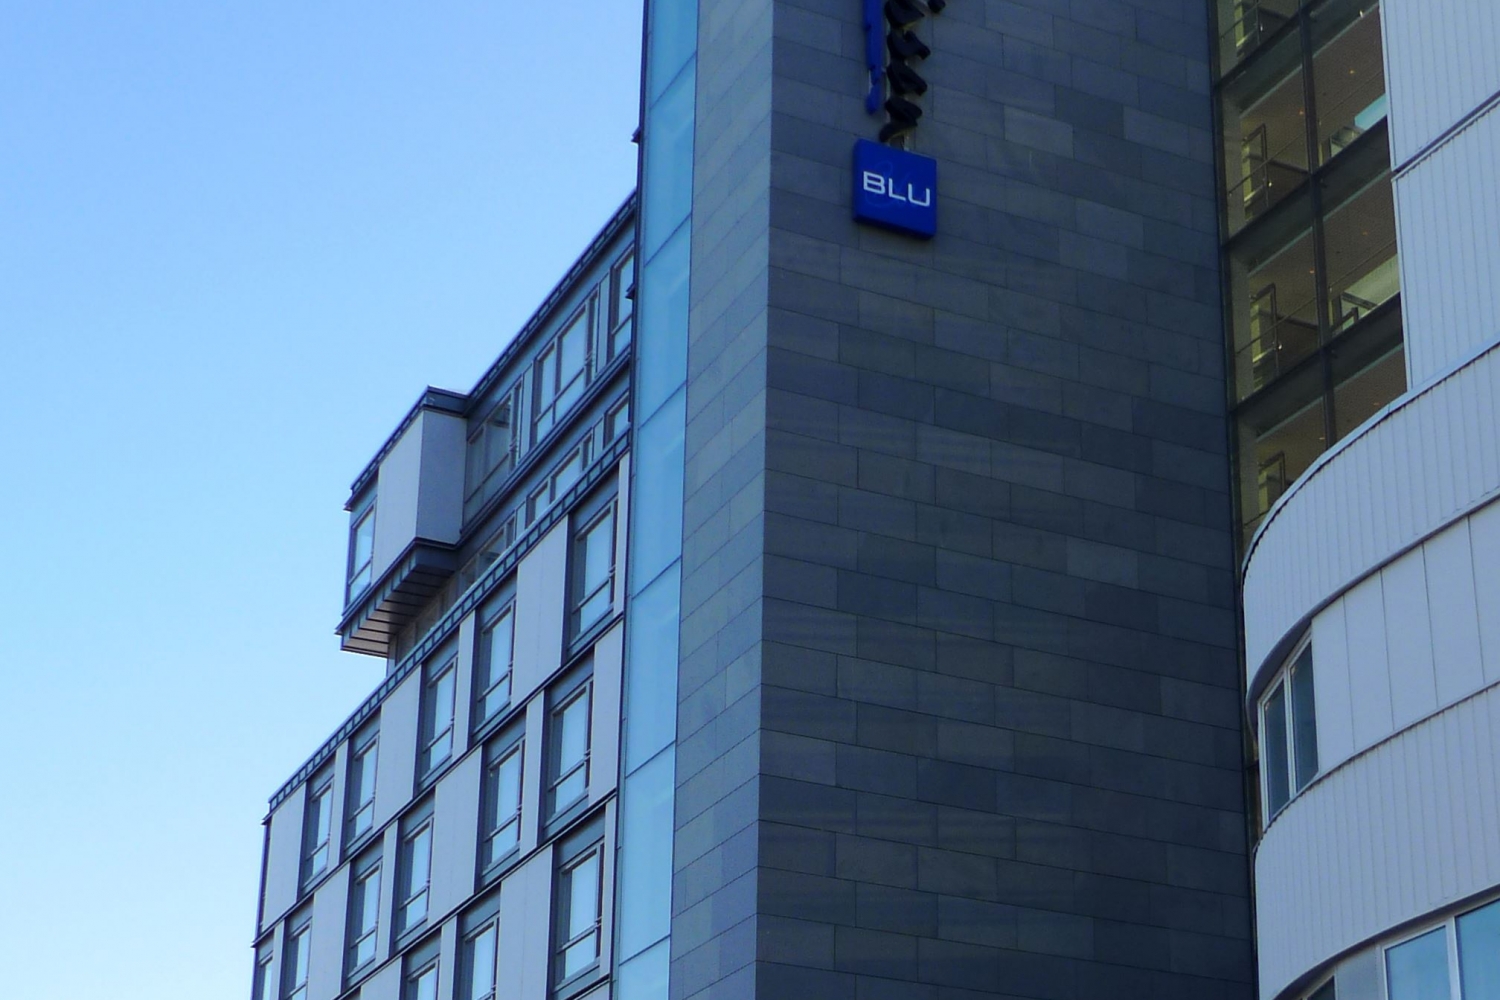 the hotels logo on the hotel building